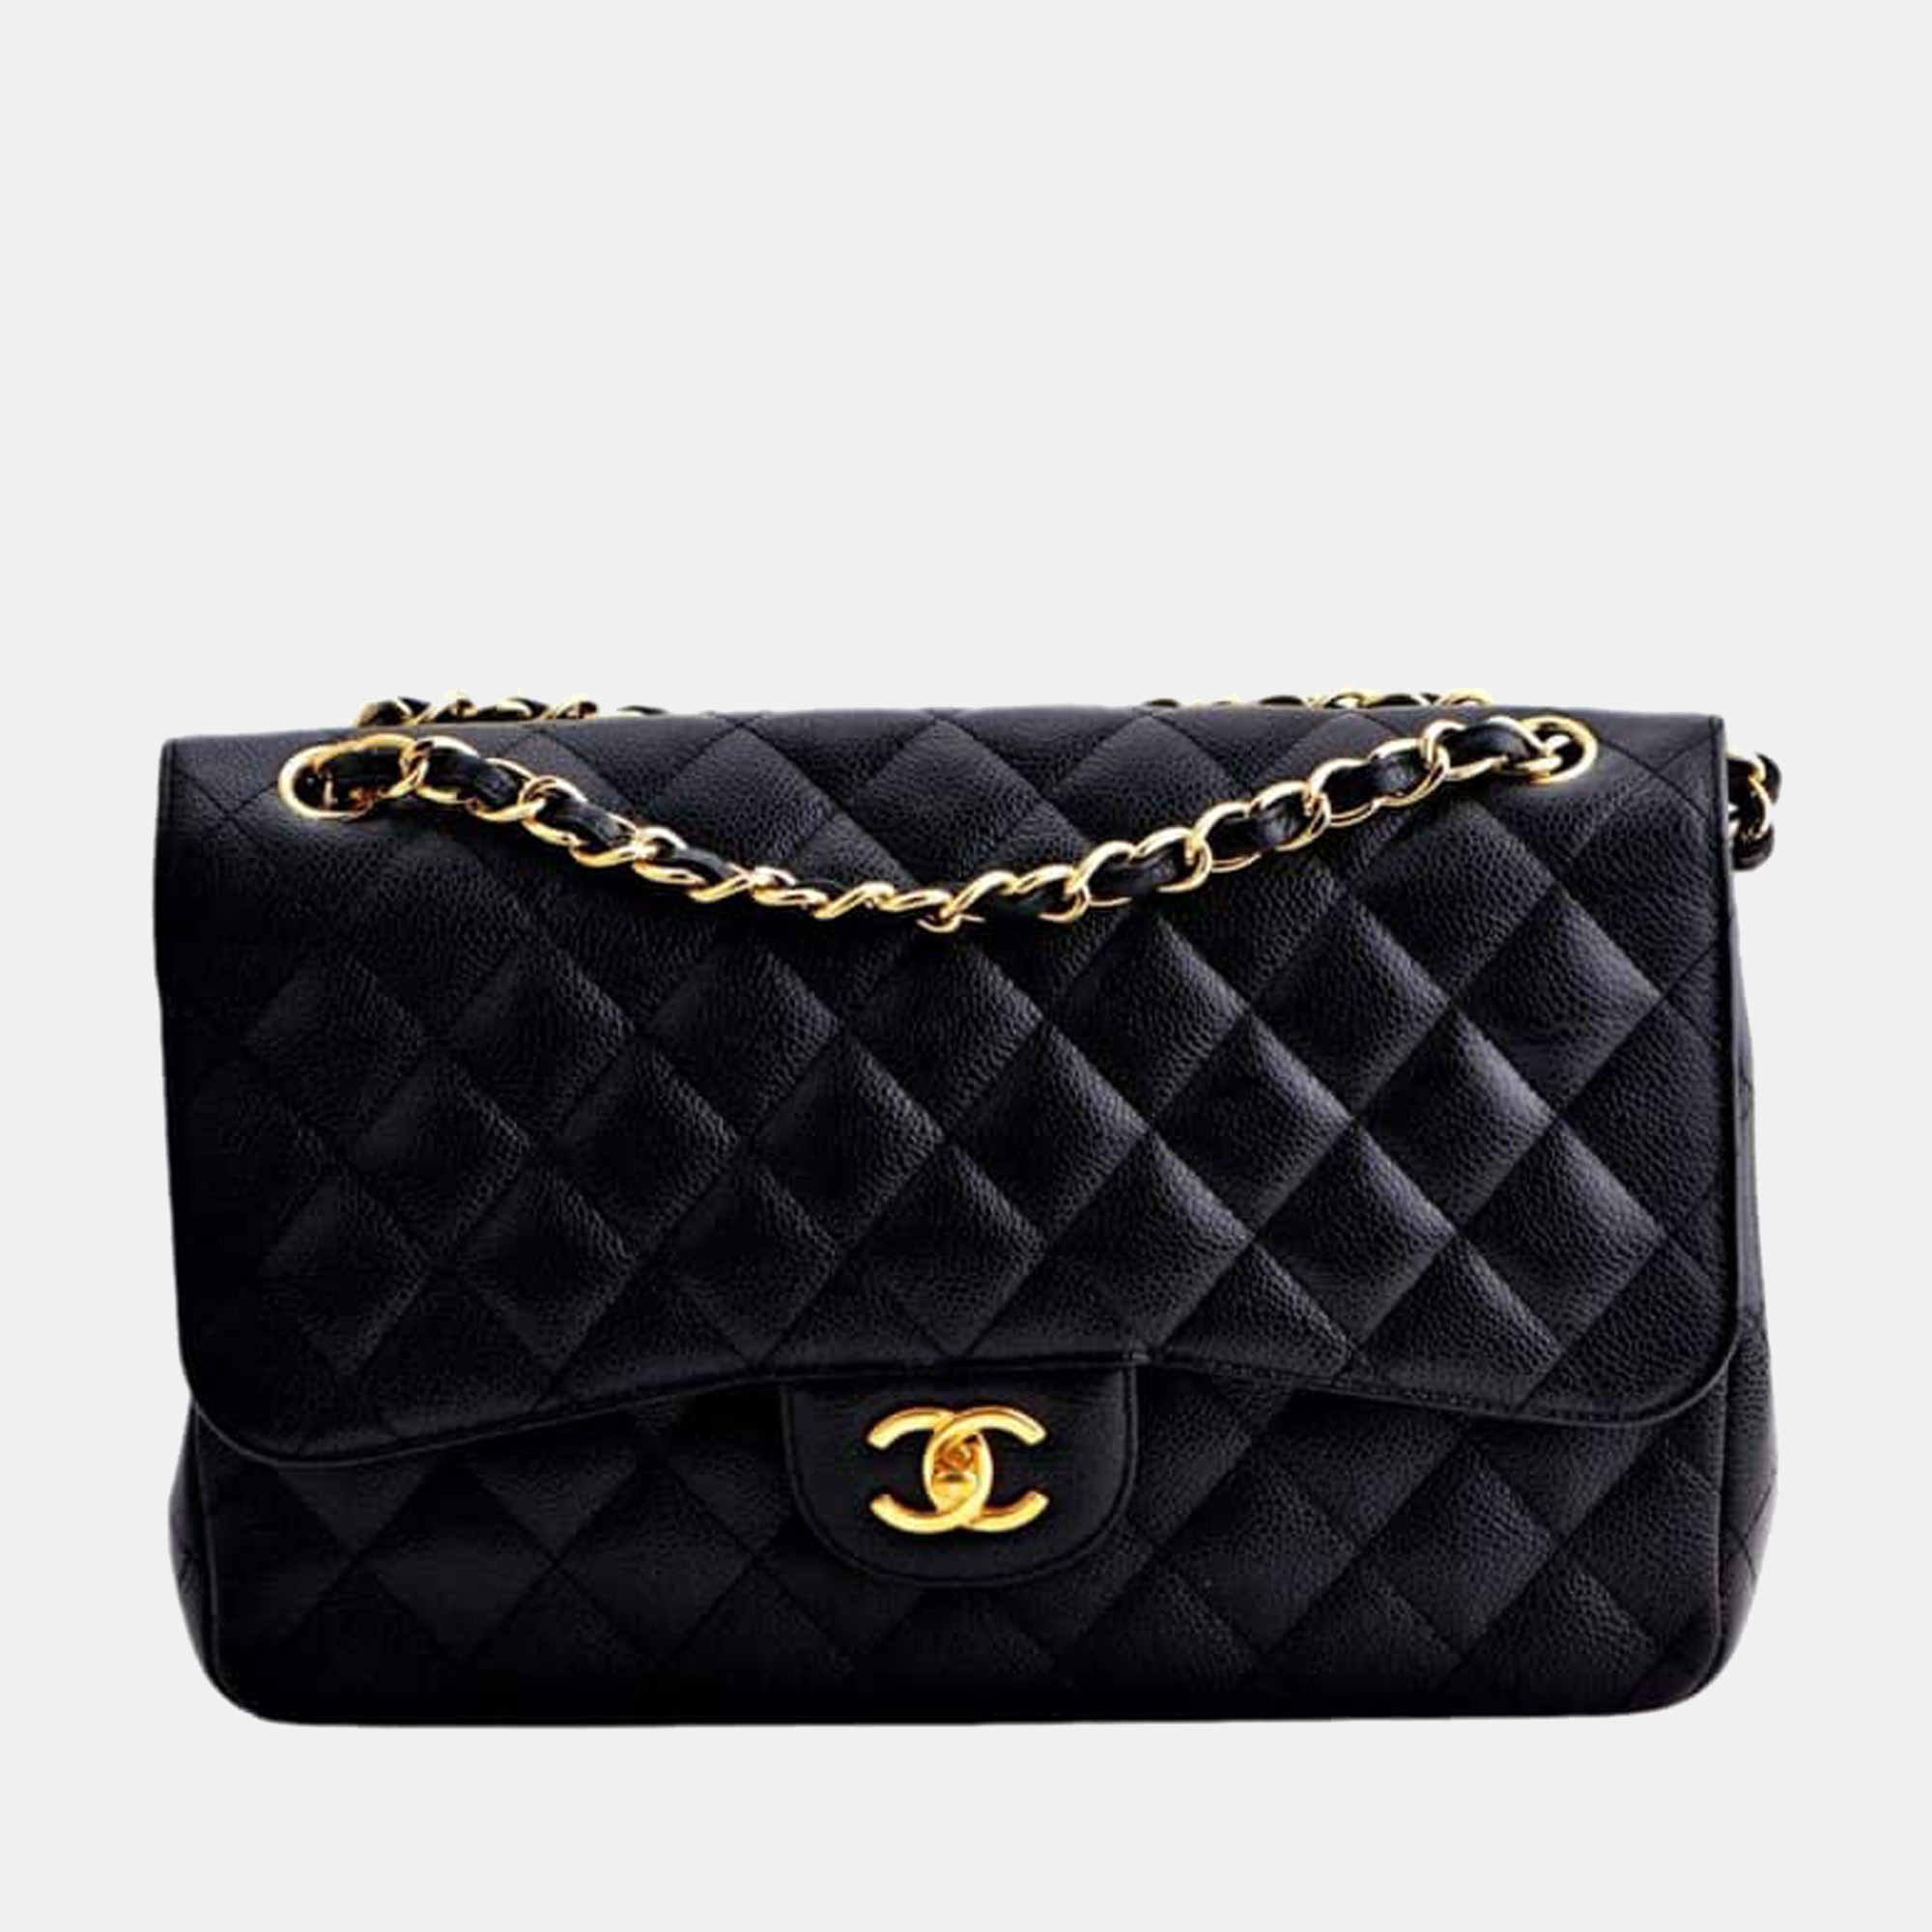 Pre-owned Chanel Jumbo Black Calfskin Caviar Double Flap Bag With Ghw